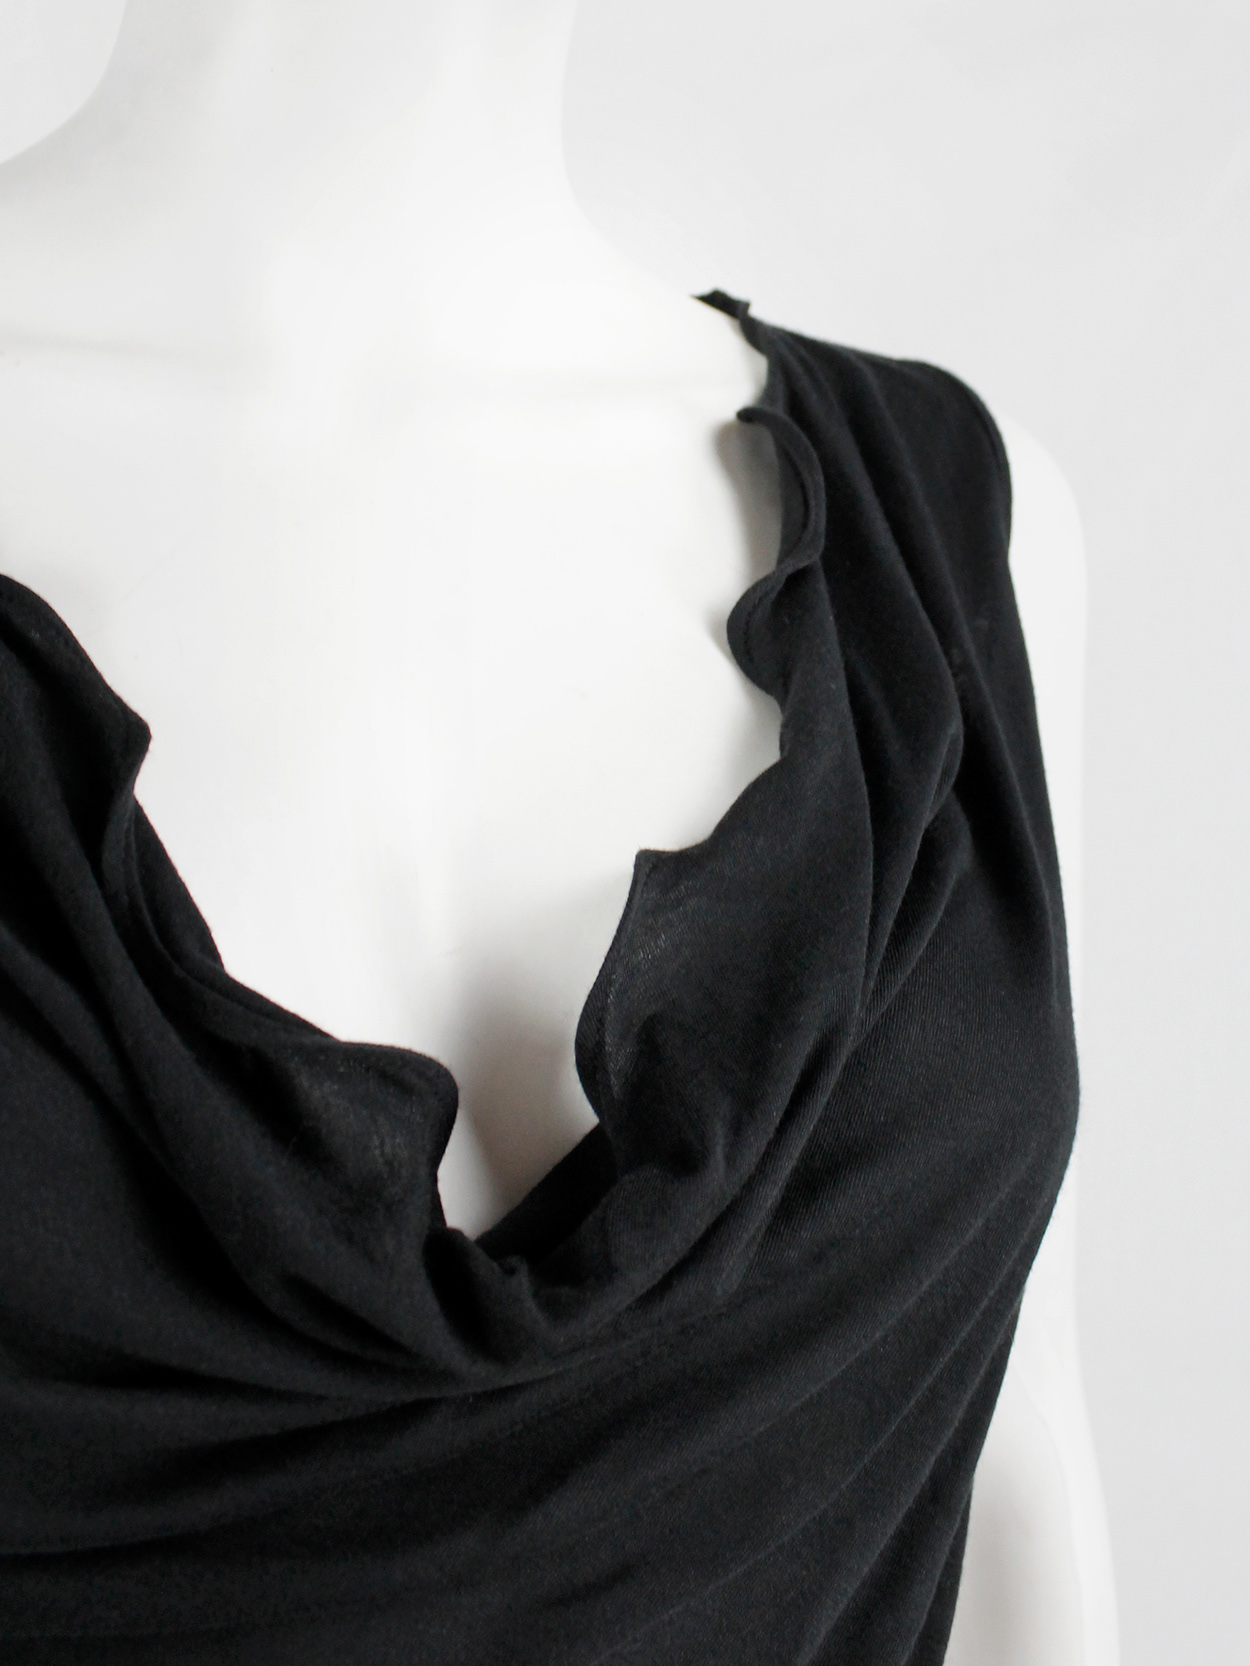 Maison Martin Margiela black t-shirt with stretched out neckline spring 2007 (11)